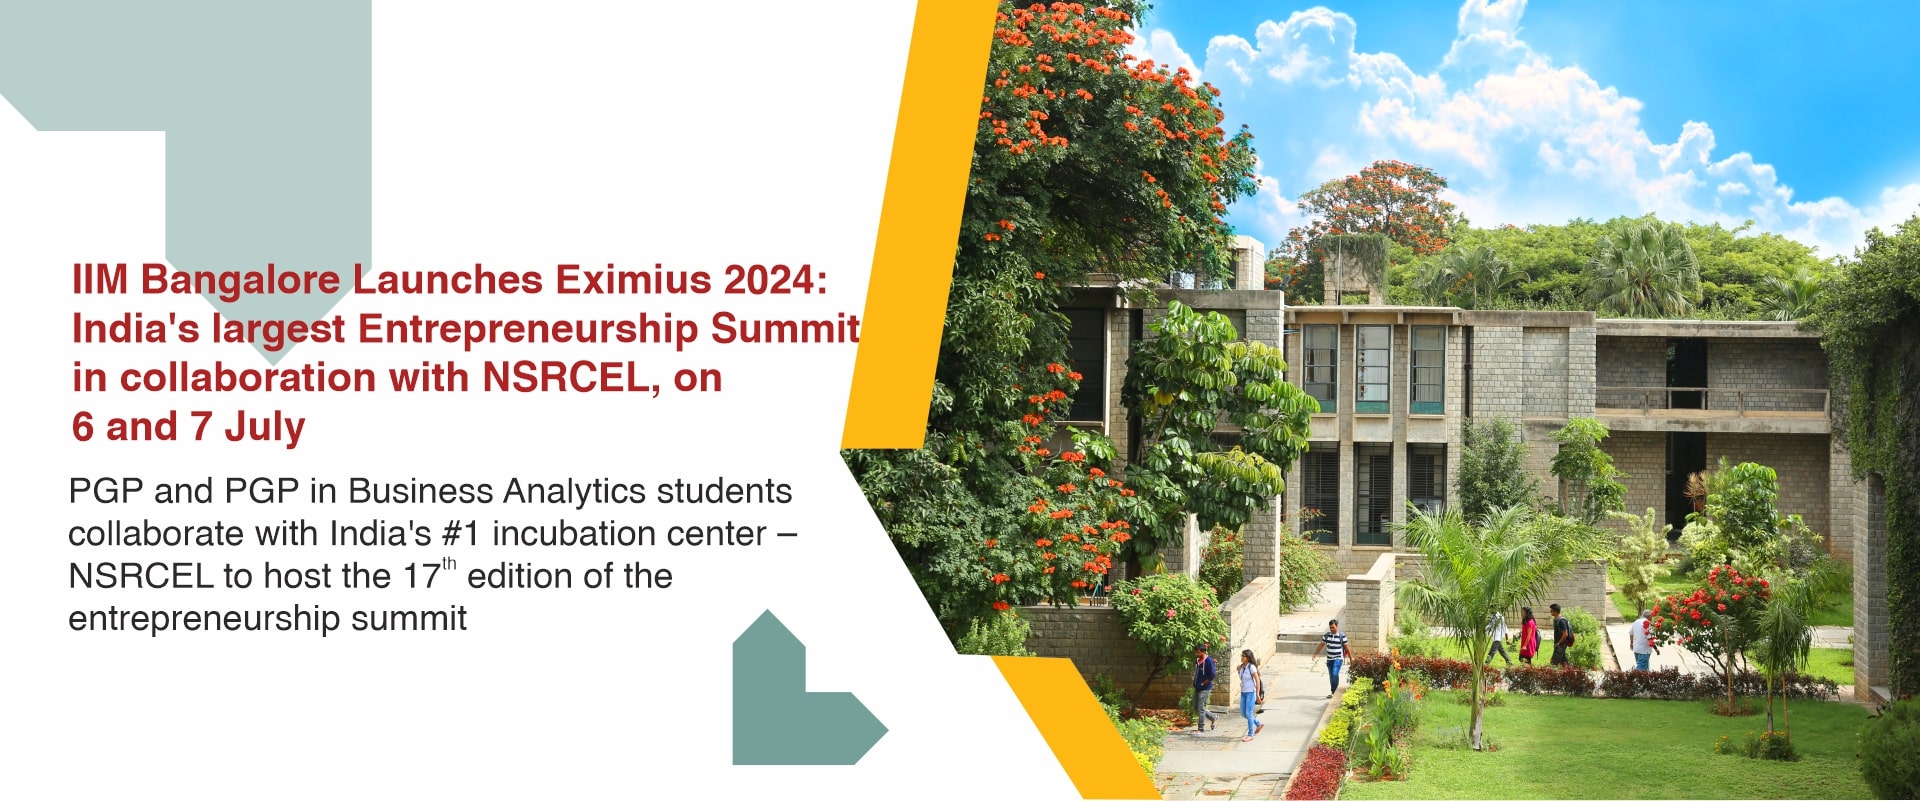 PGP and PGP in Business Analytics students jointly with NSRCEL to host the annual entrepreneurship summit ‘Eximius 2024’ on 6 and 7 July